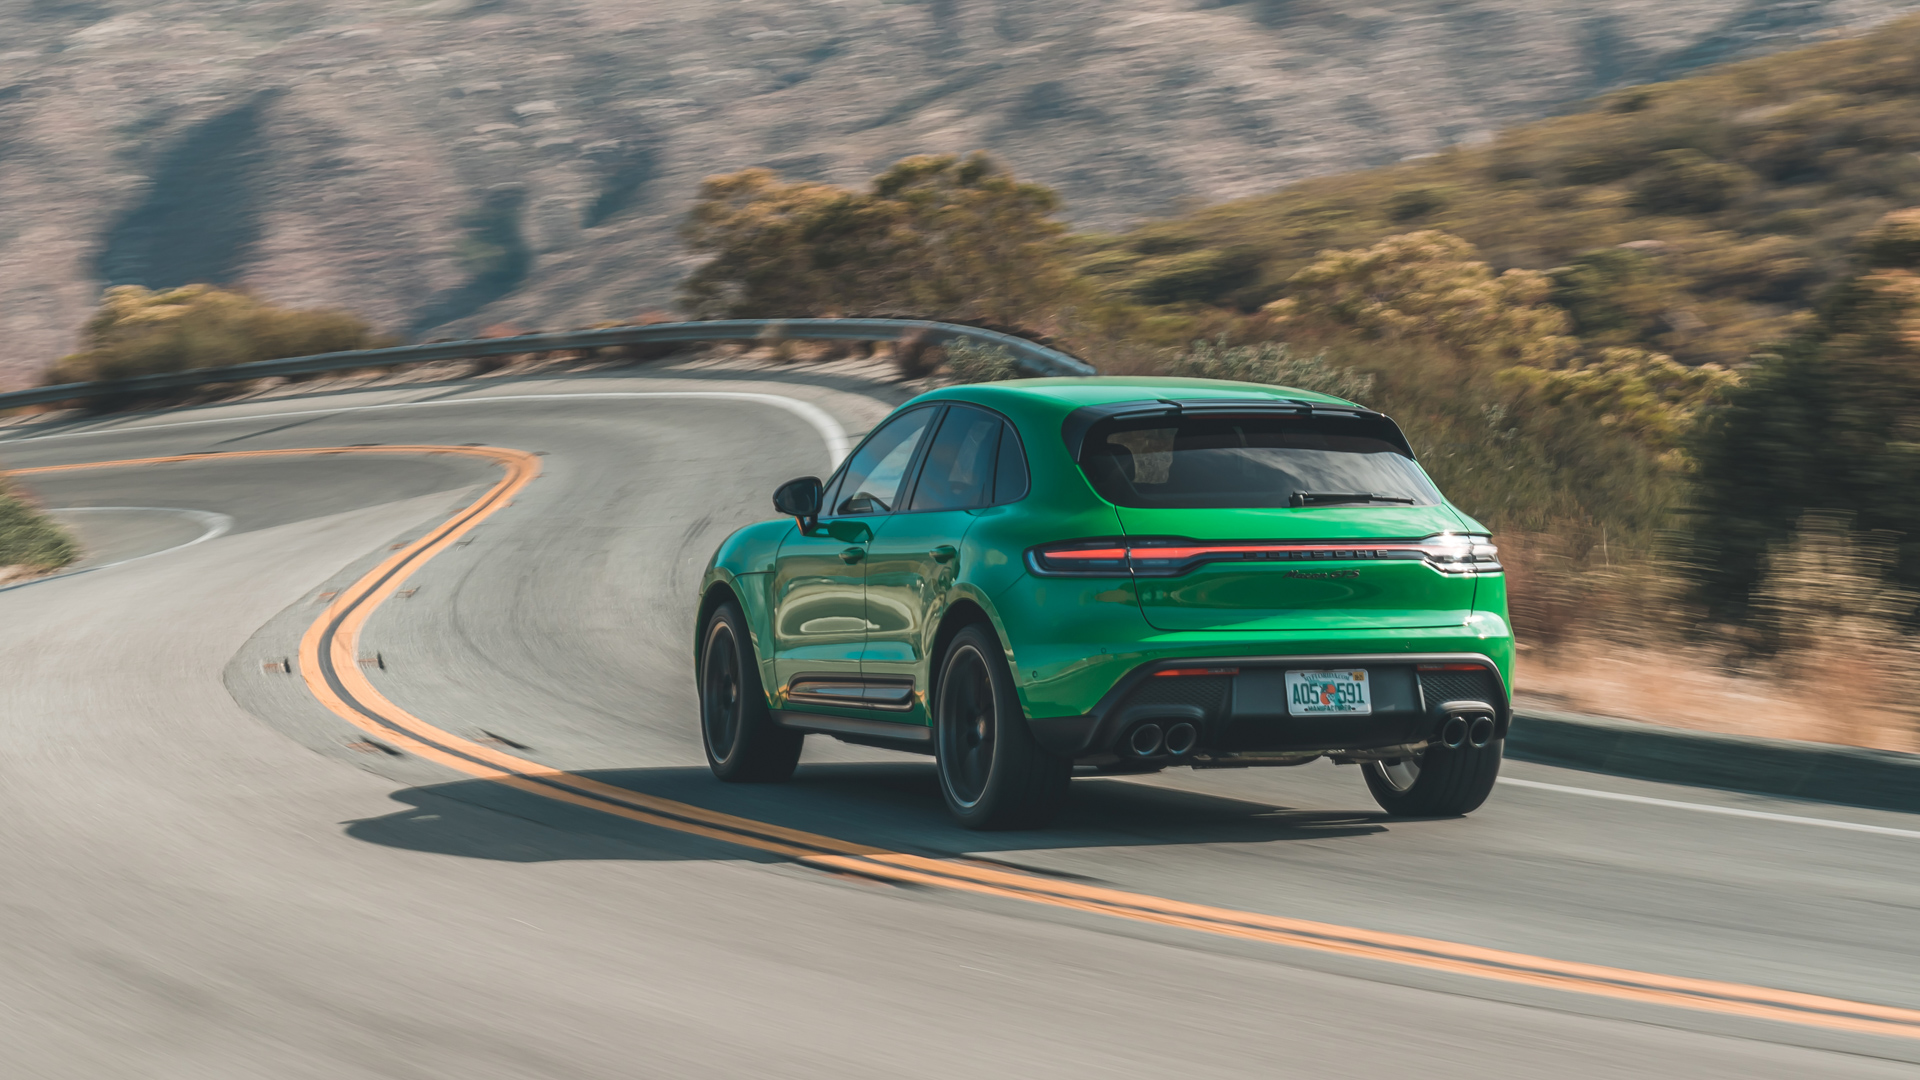 2022 Porsche Macan, 2022 Ford Expedition, 2023 BMW X1: This Week’s Top Photos Auto Recent